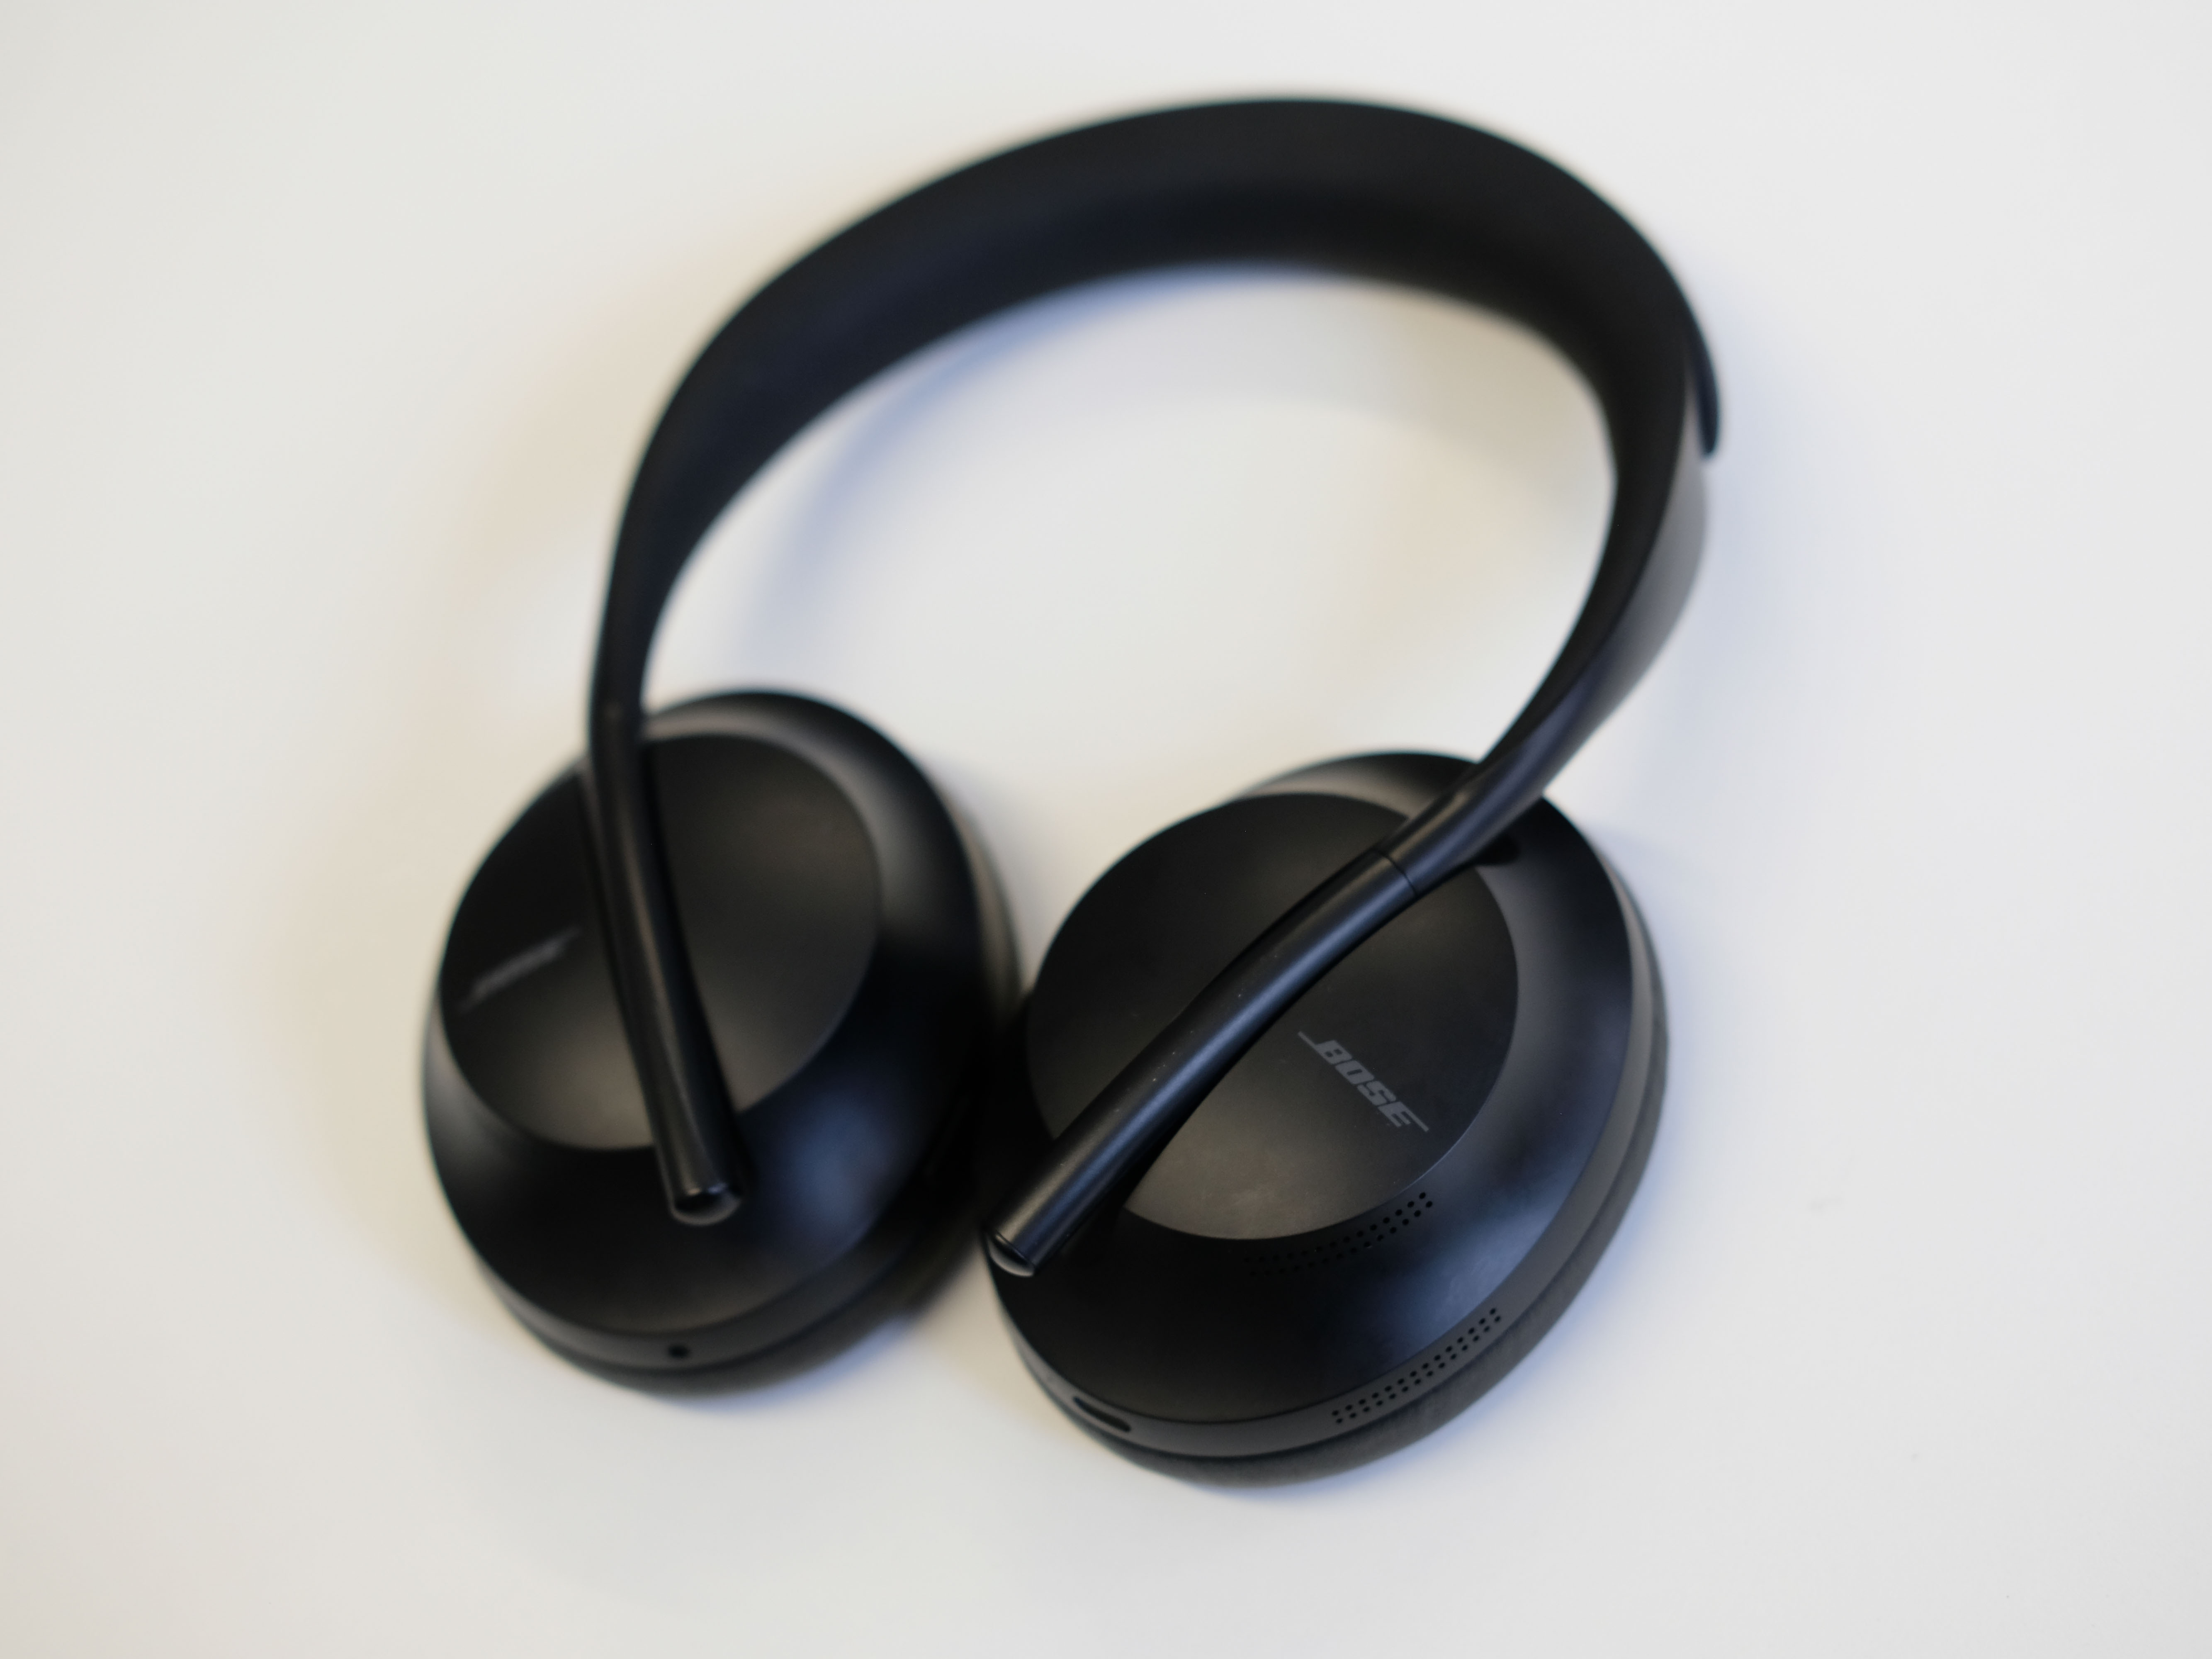 Bose Noise Cancelling Headphones 700 review | Stuff